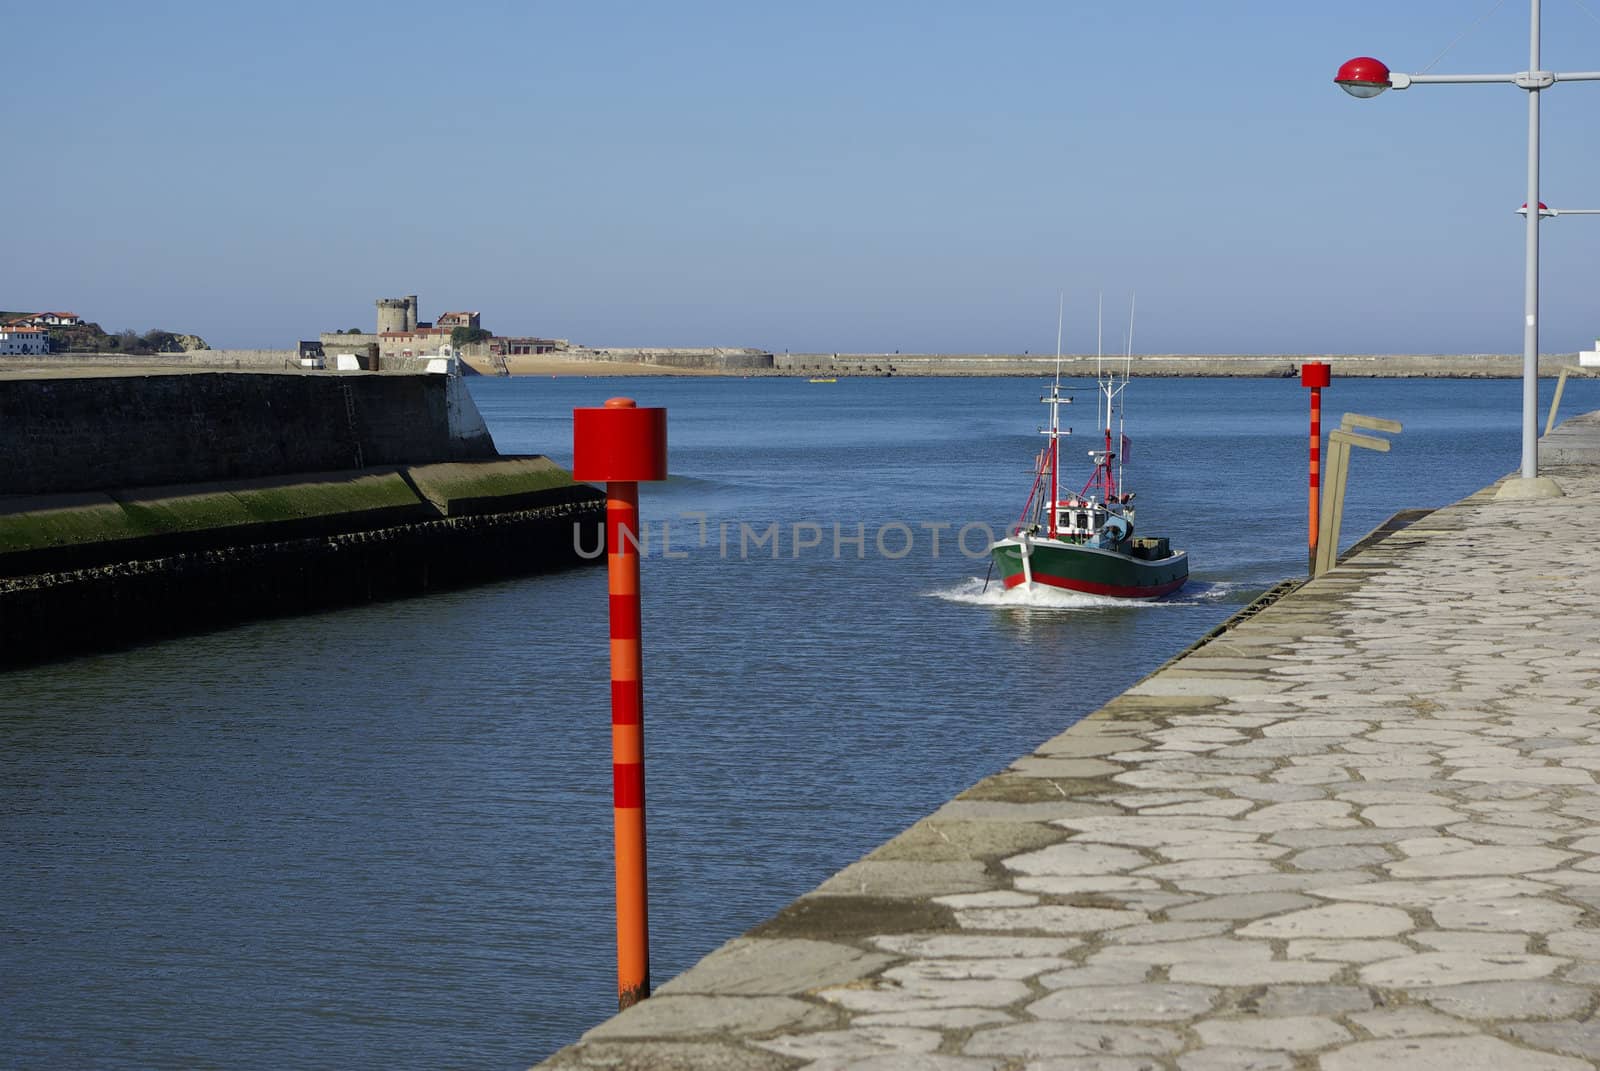 Little Boat in Entrance of an Harbor with blue sky and sea